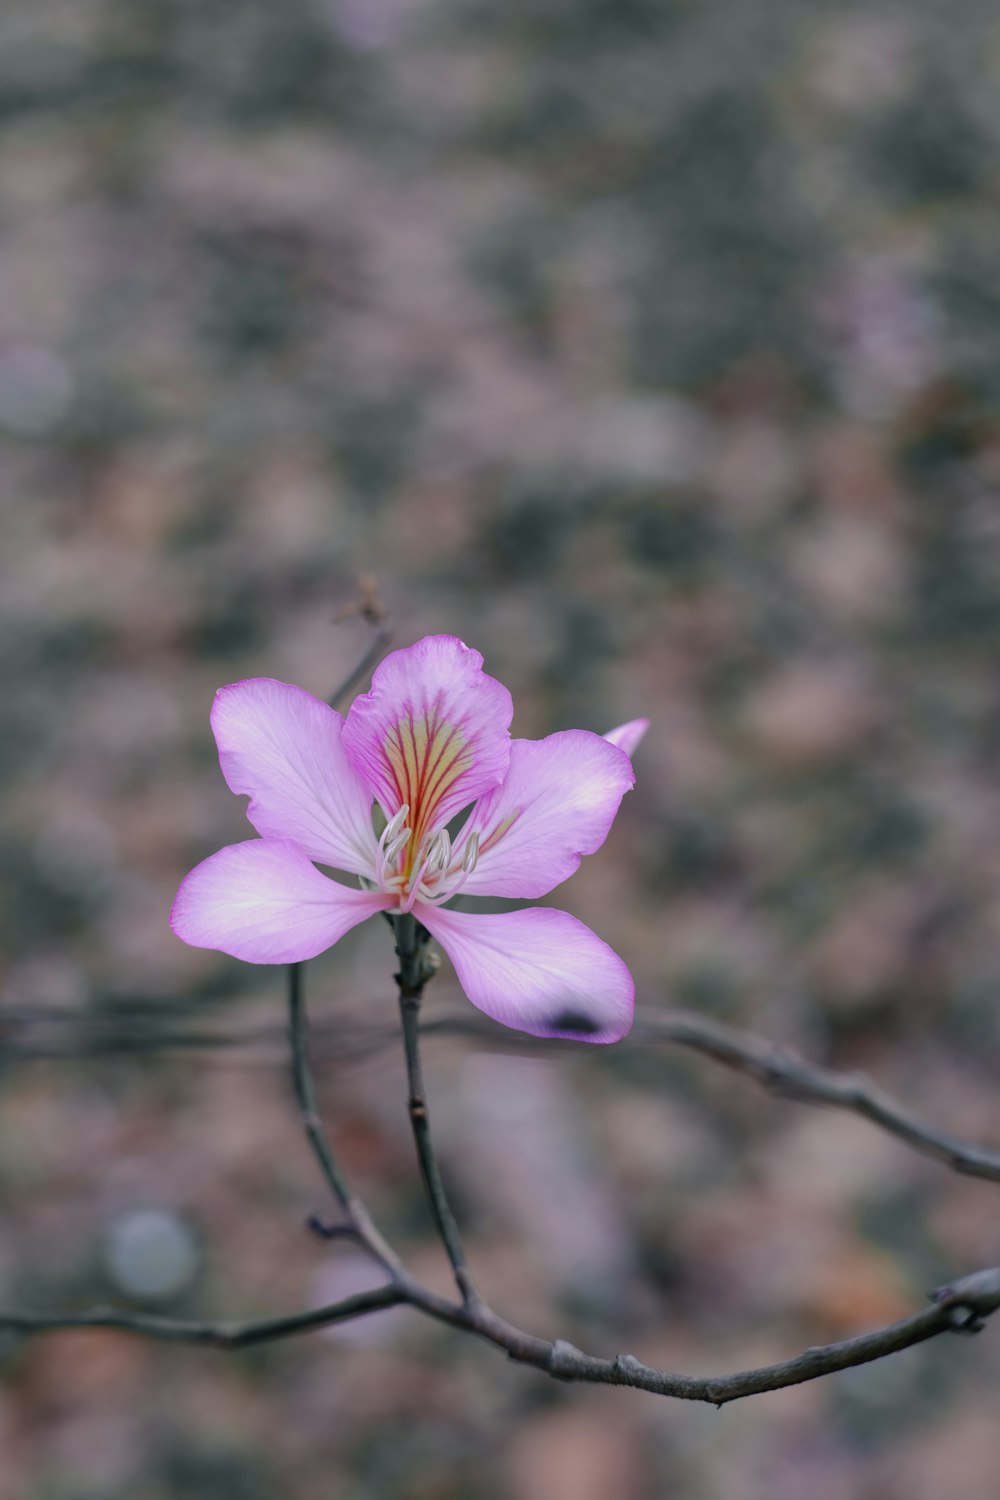 a single pink flower on a thin twig